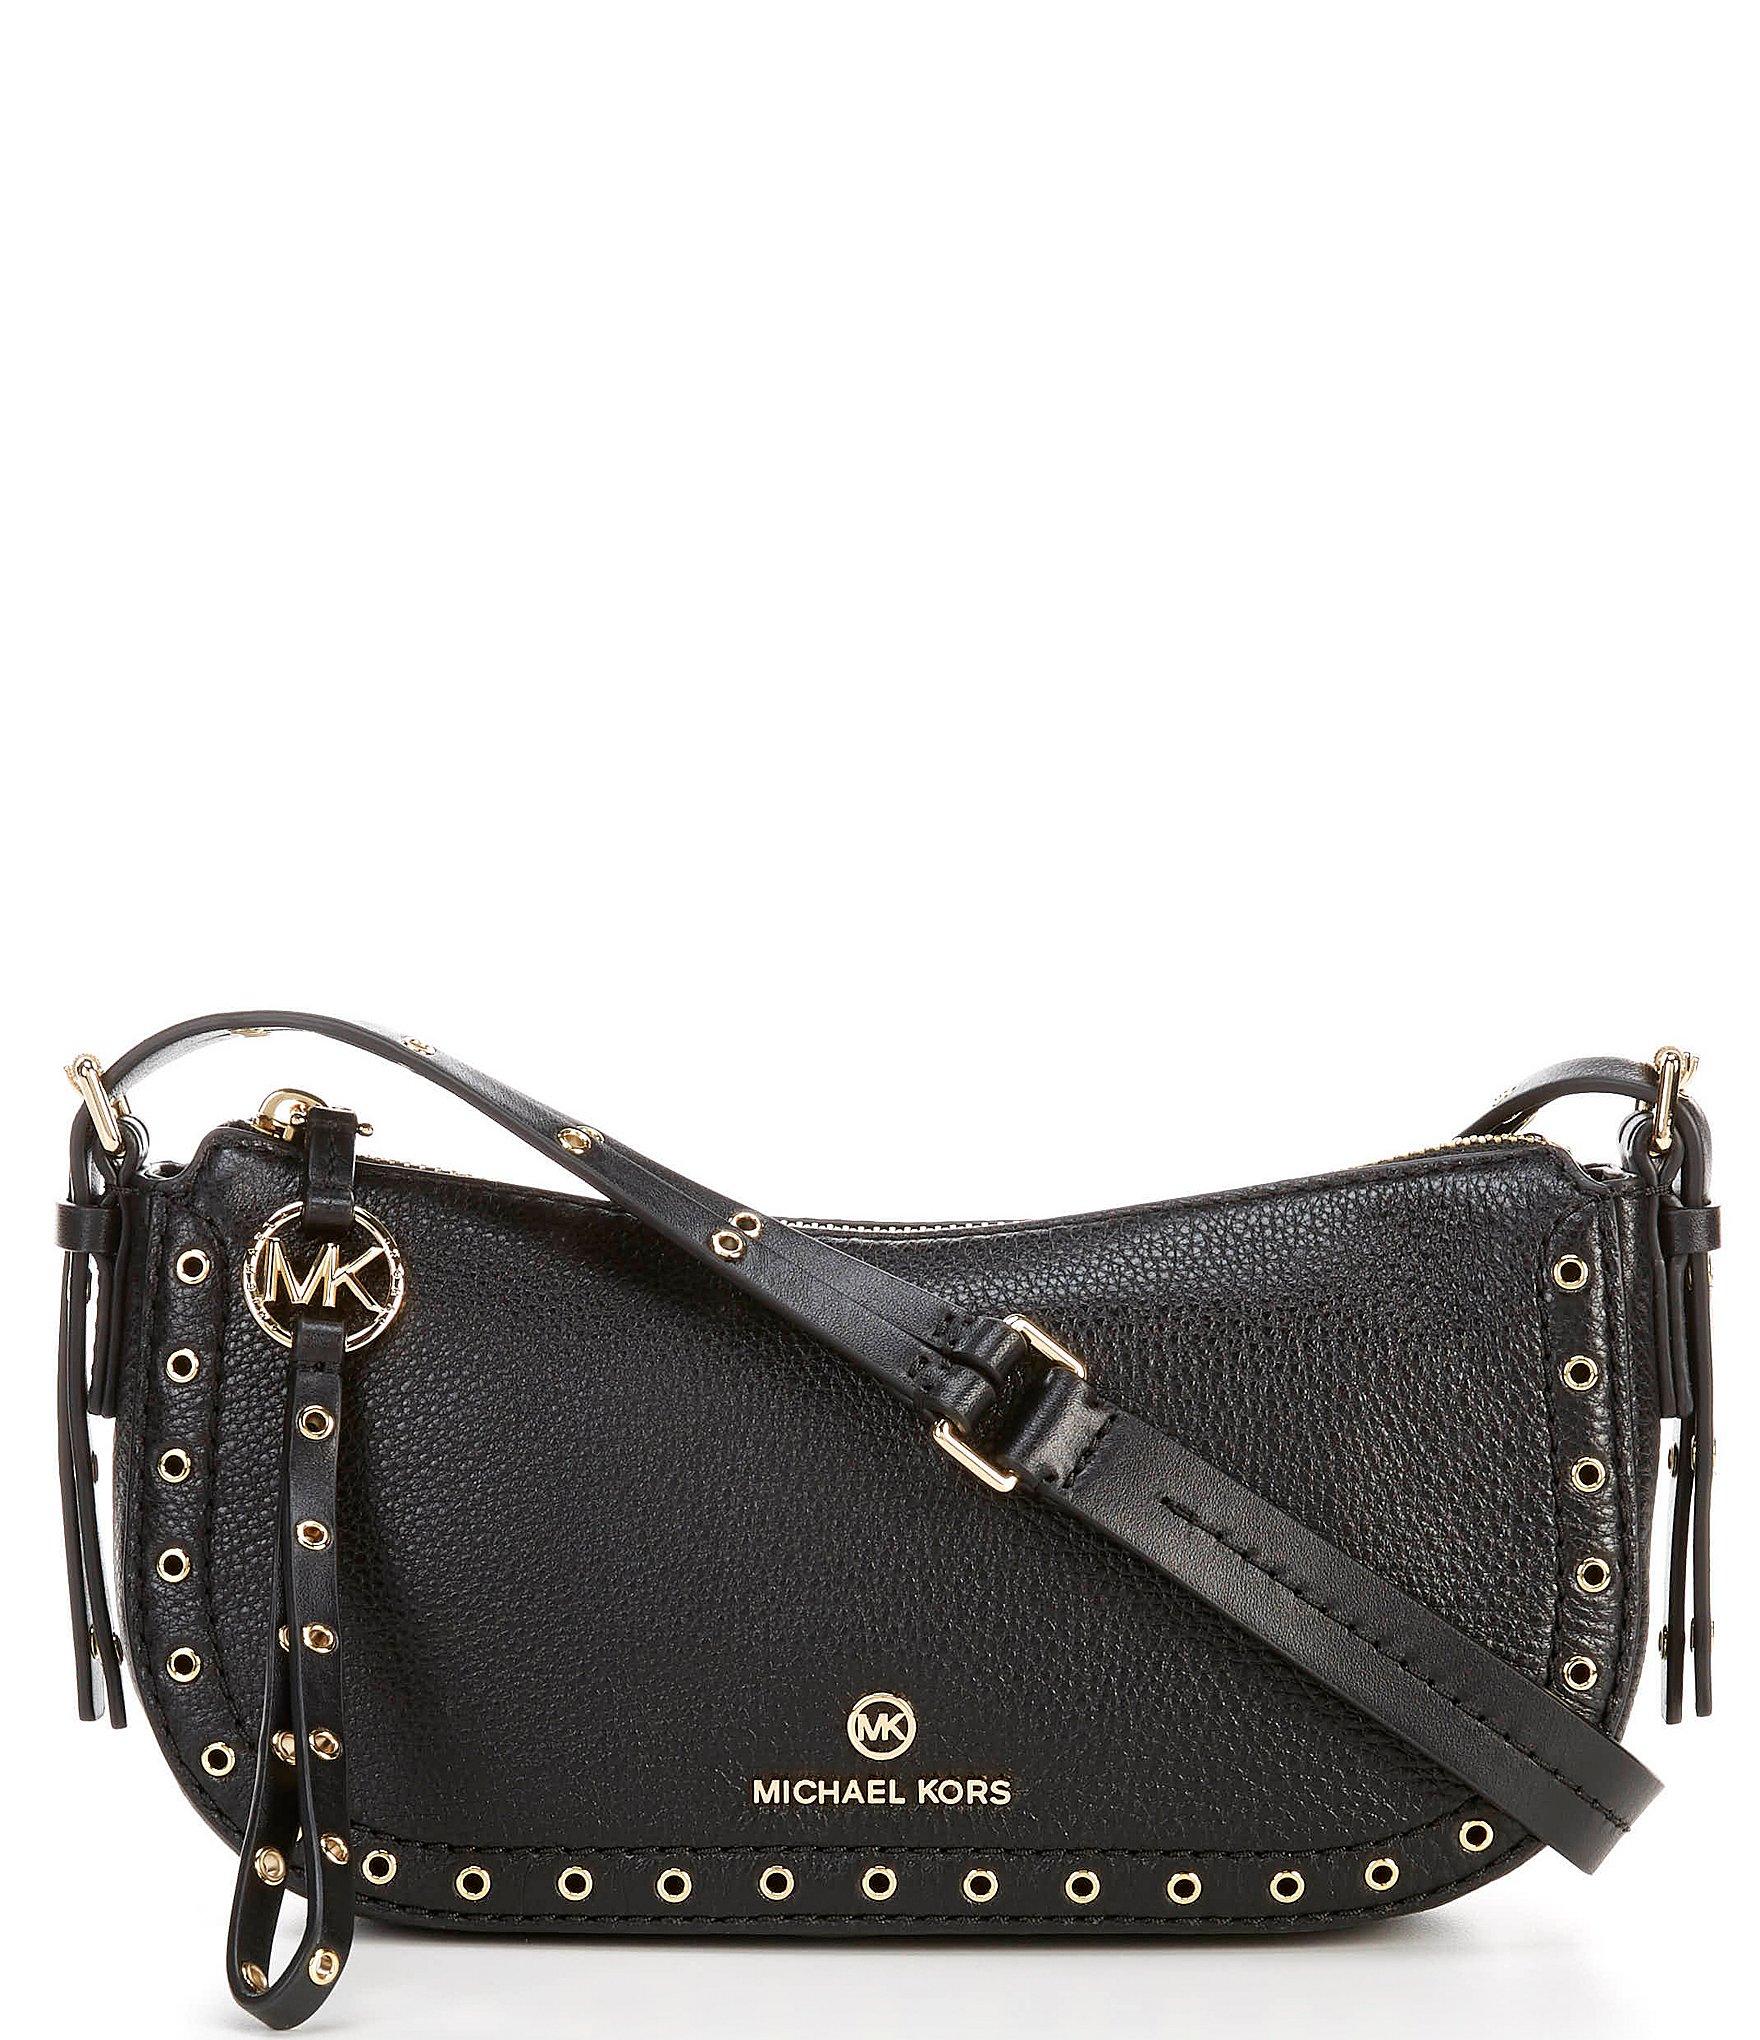 Michael Kors Michael Camden Studded Pebble Leather Extra Small Pouchette in Black - Lyst